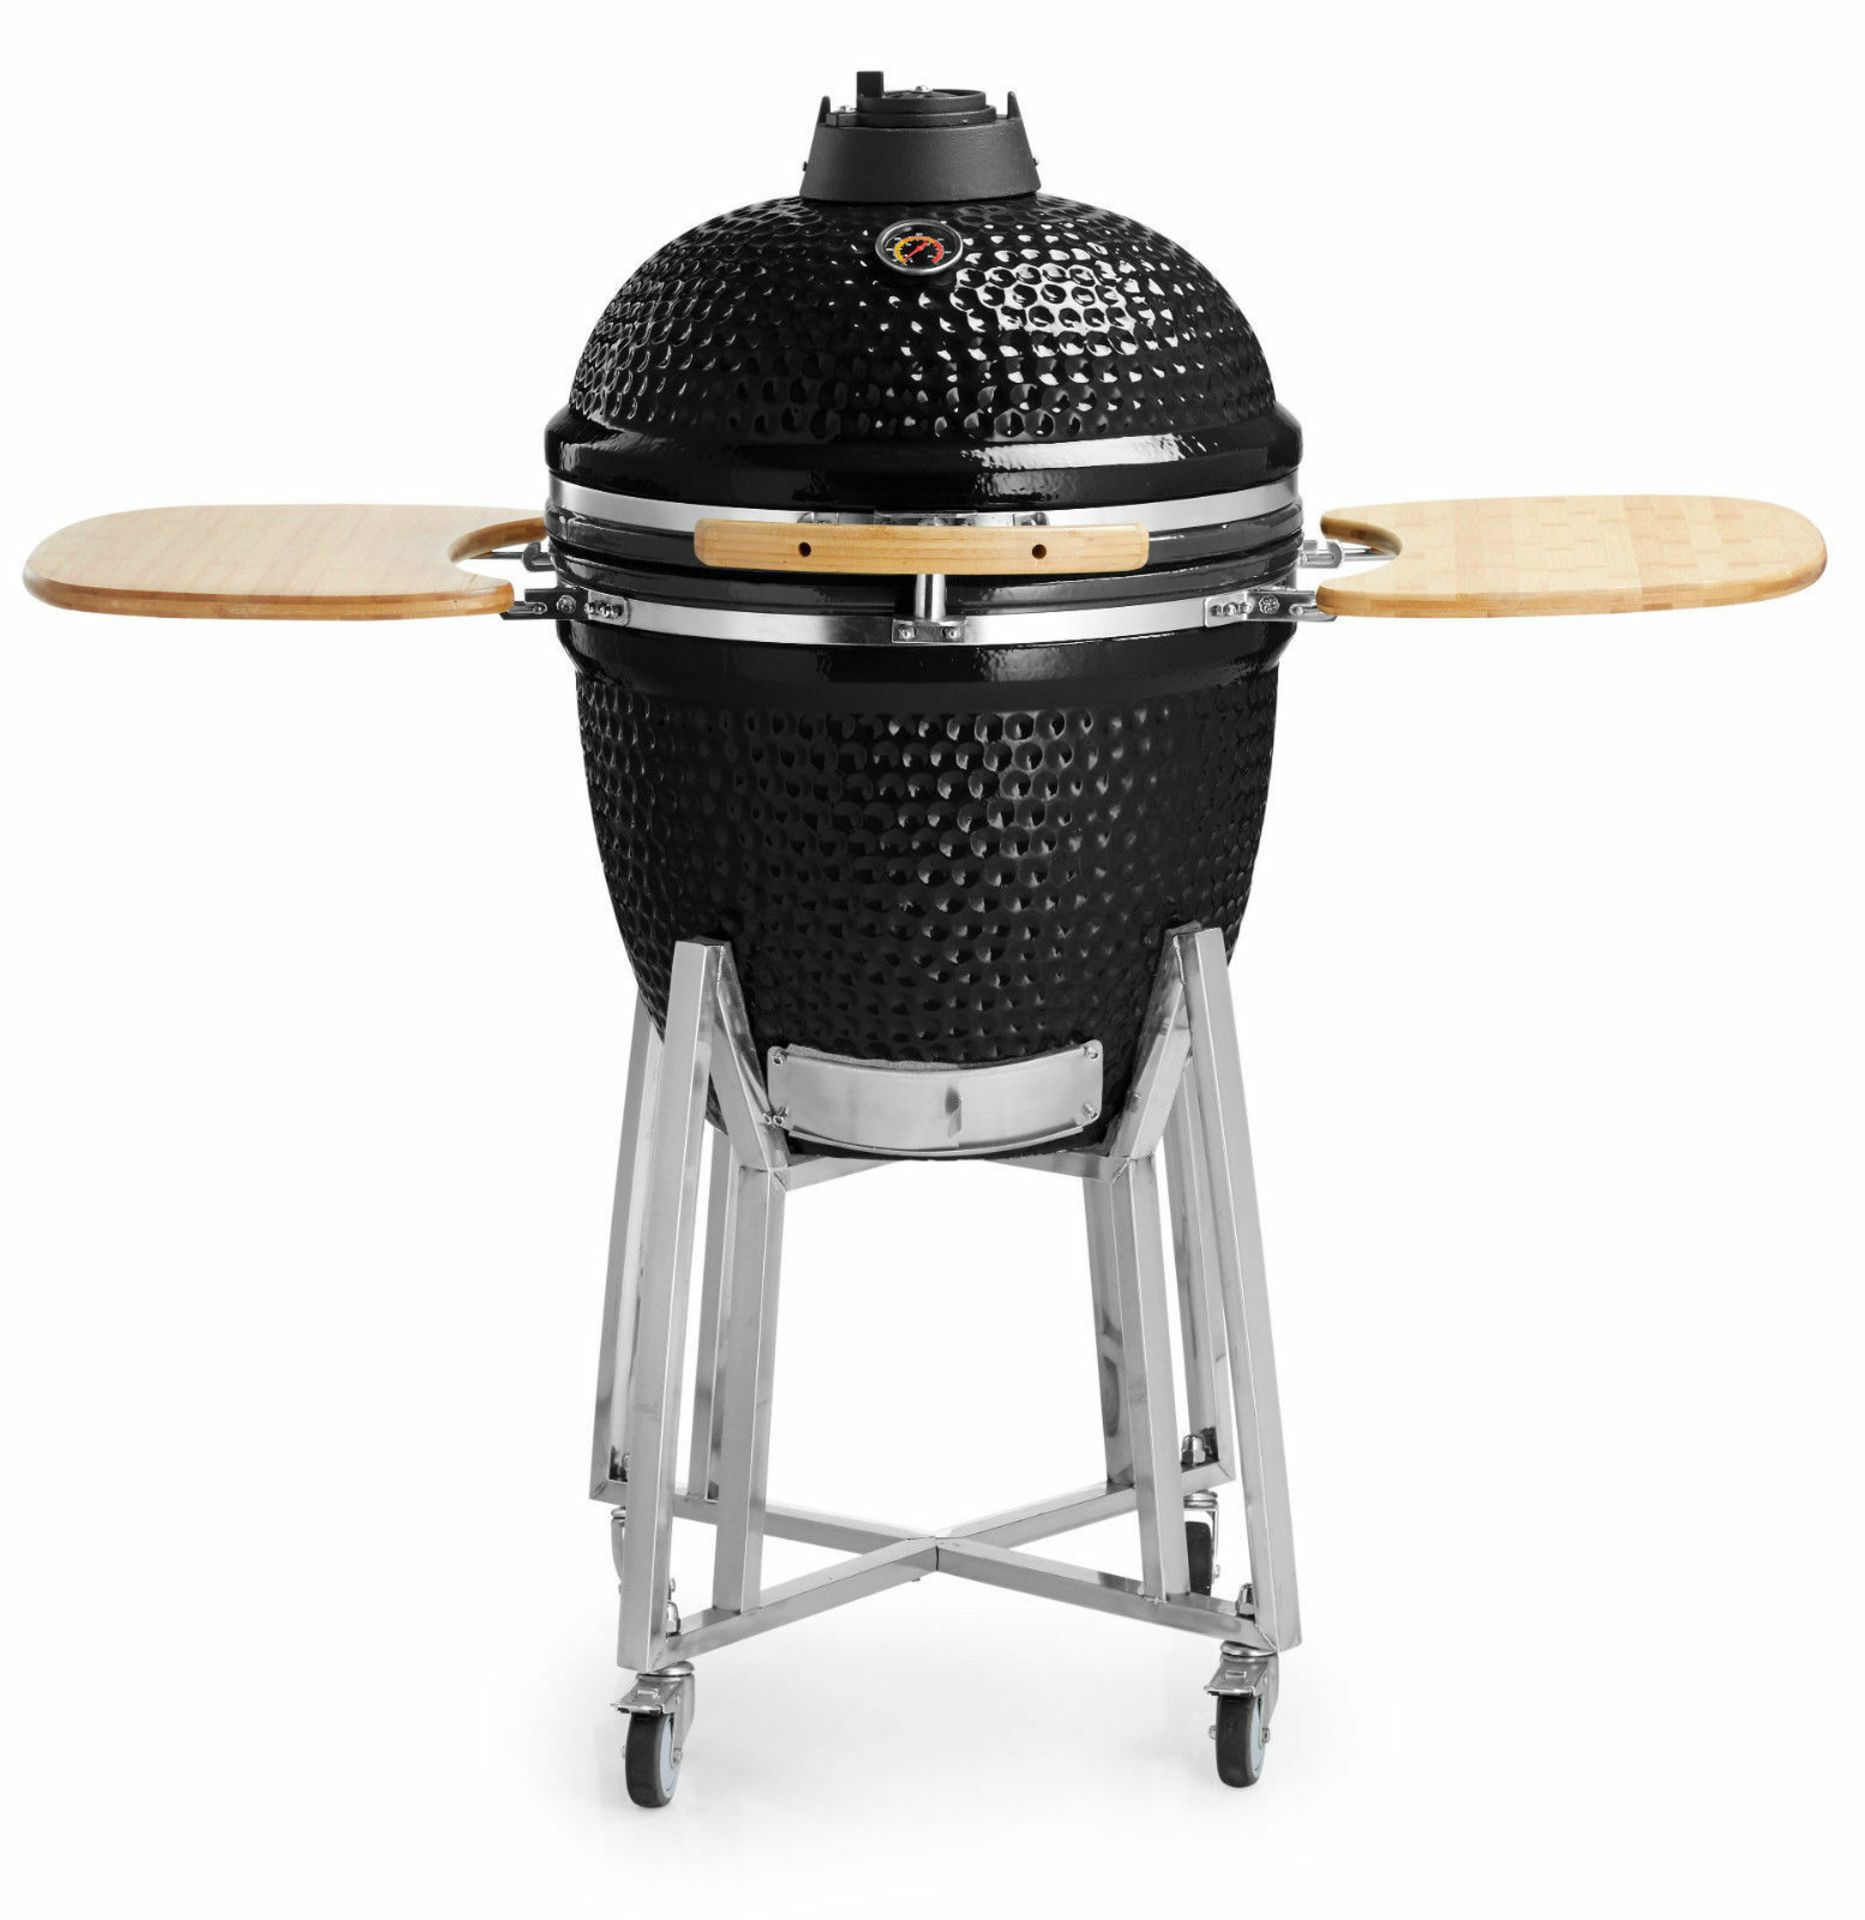 Summer is here! Brand new, 21" Ceramic Kamado BBQ Grill Smoker & Cooking Oven Charcoal Kettle Egg - Image 3 of 5